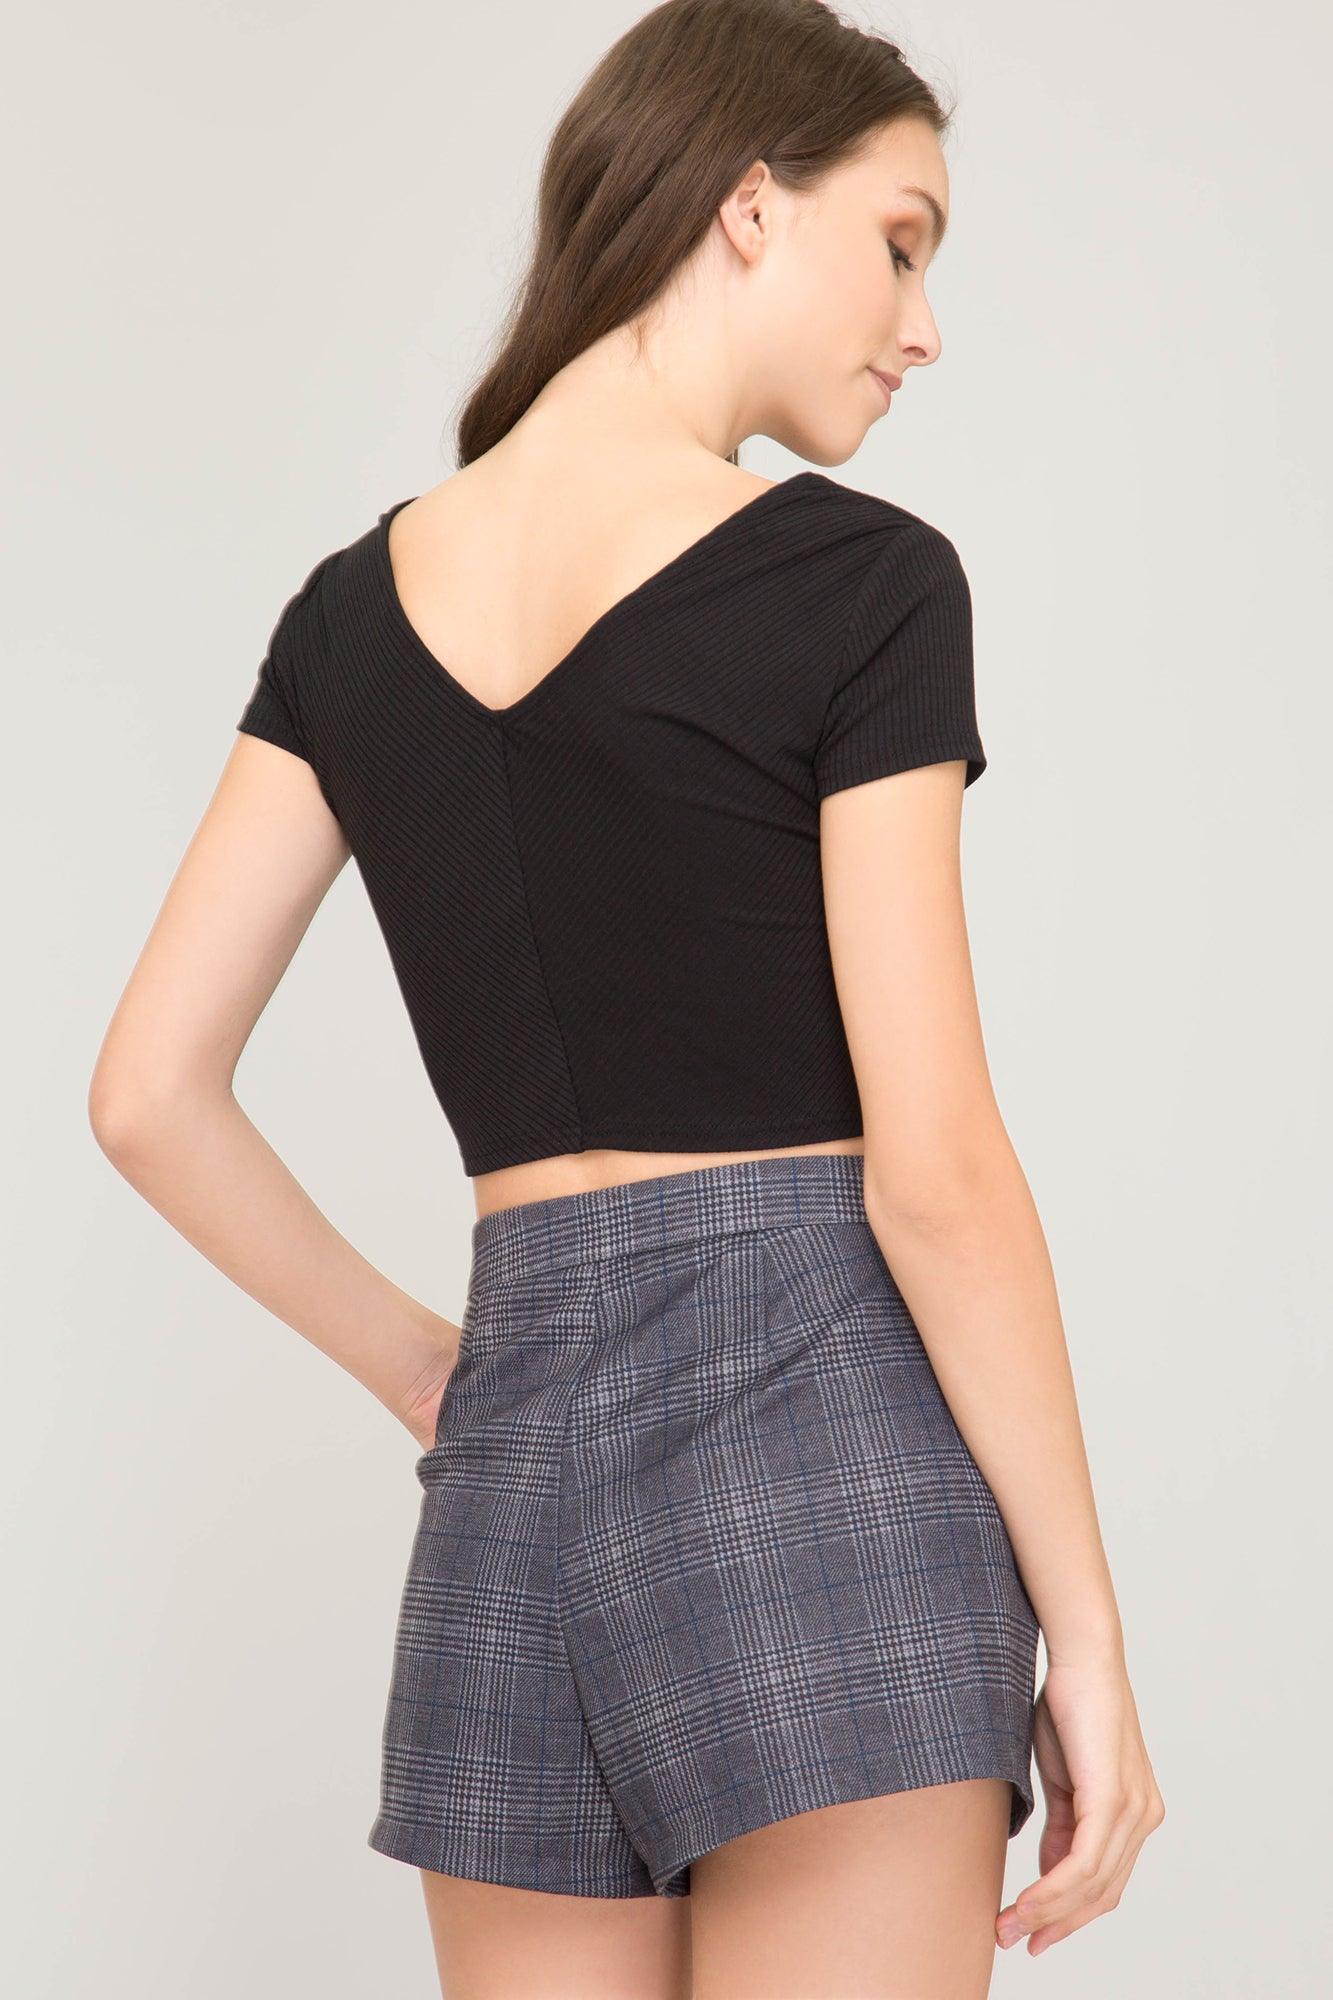 plaid high waist shorts-Shorts-She + Sky-RK Collections Boutique